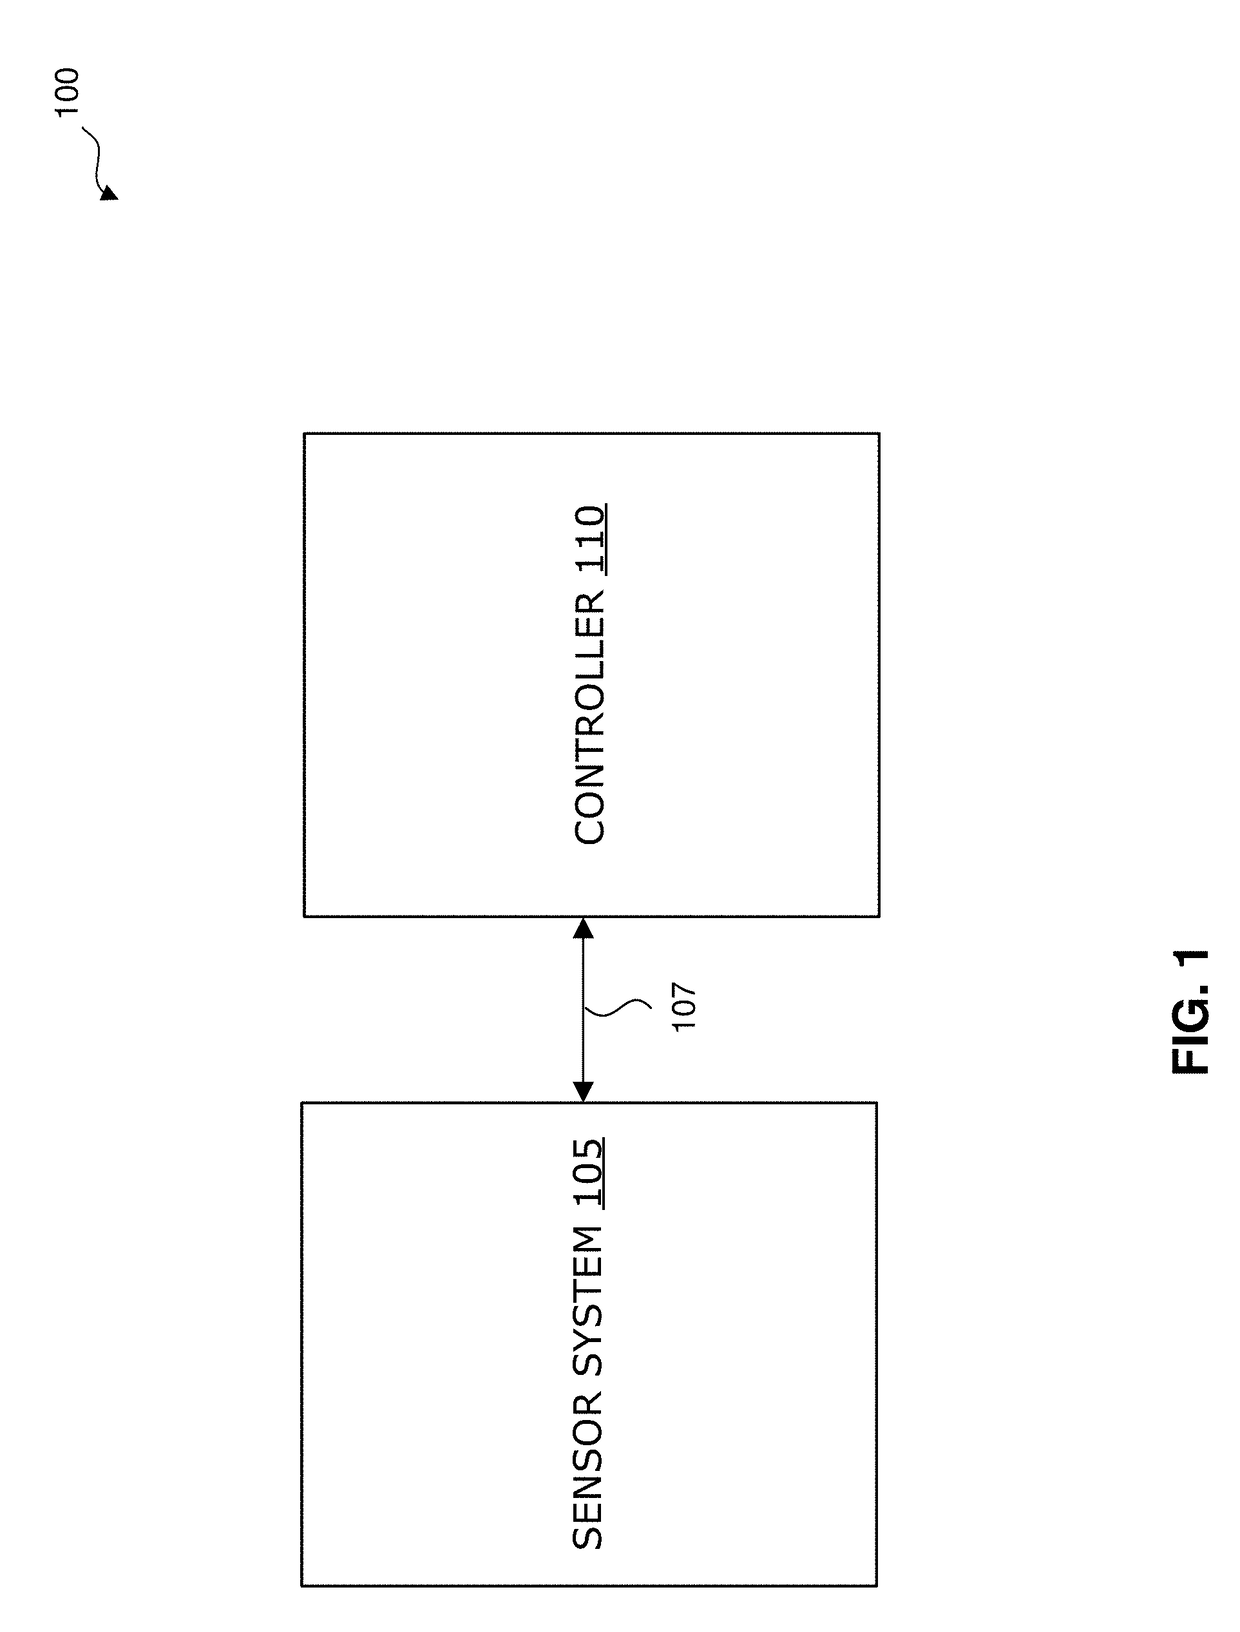 Signal protocol fault detection system and method